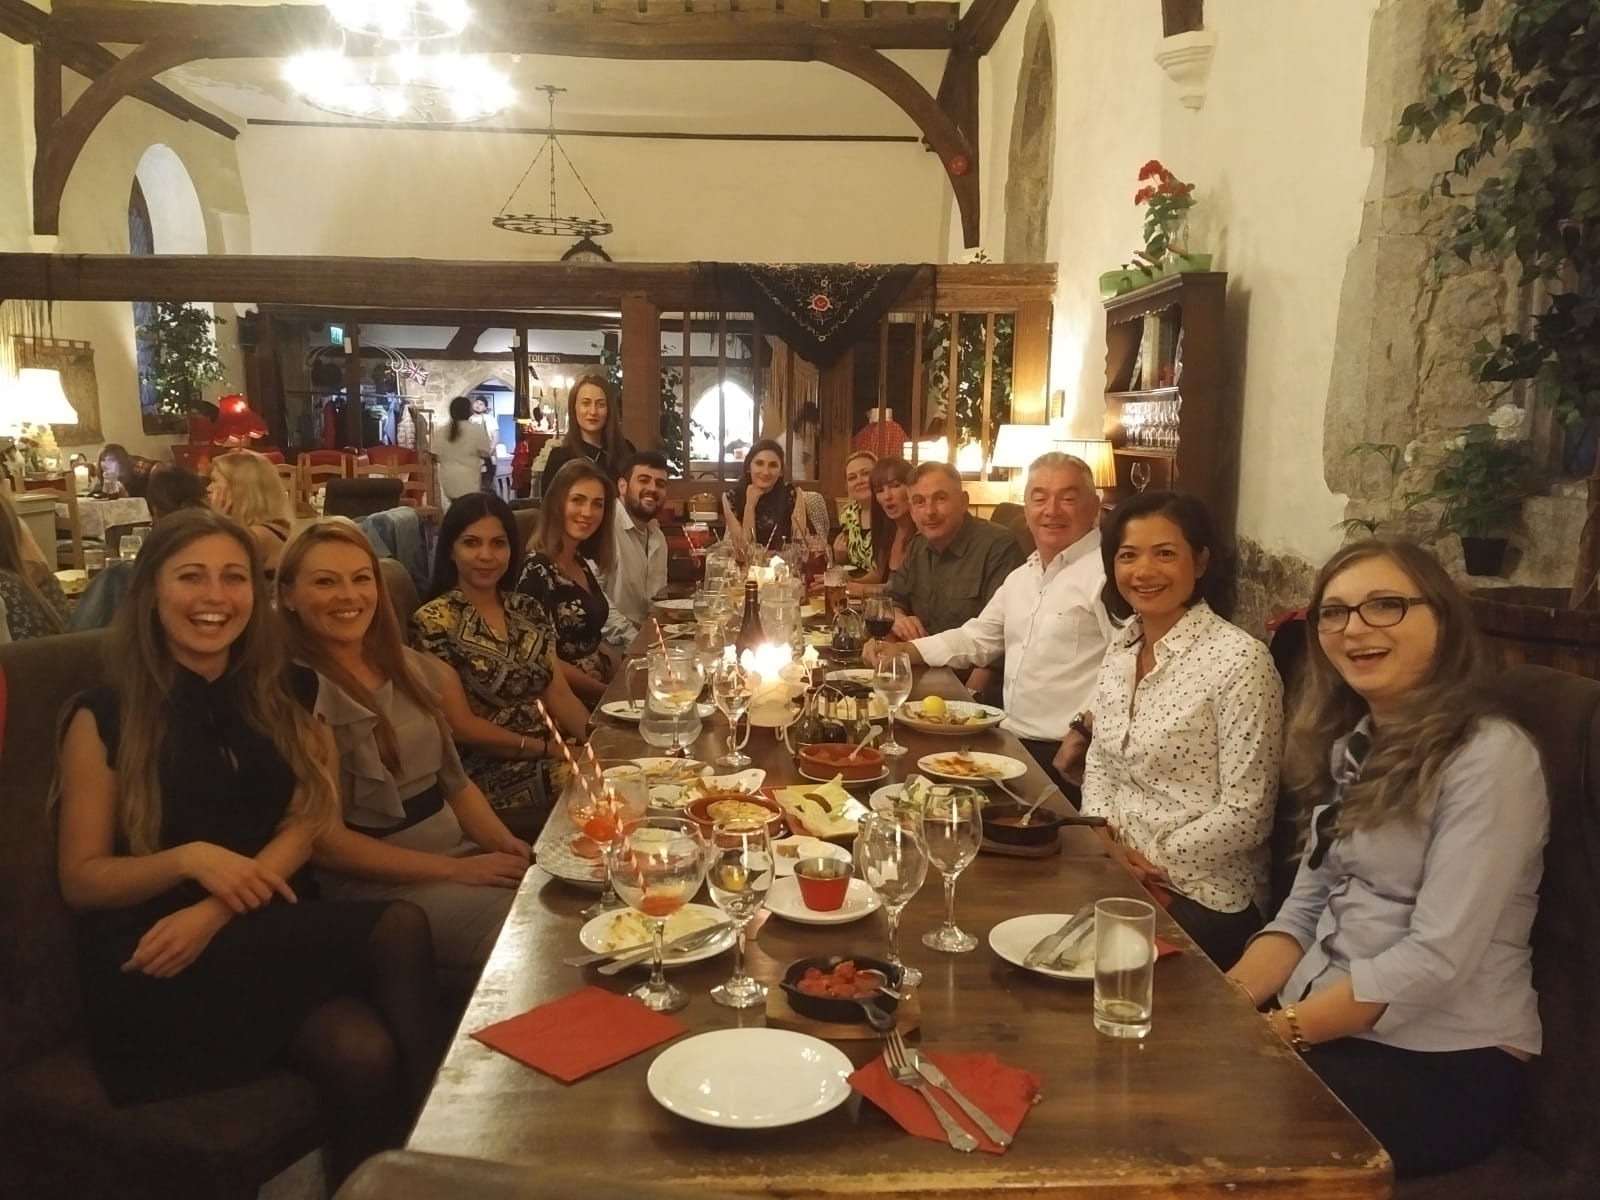 Connect Staff head to their ‘Summer Get together’ in Maidstone July 2019